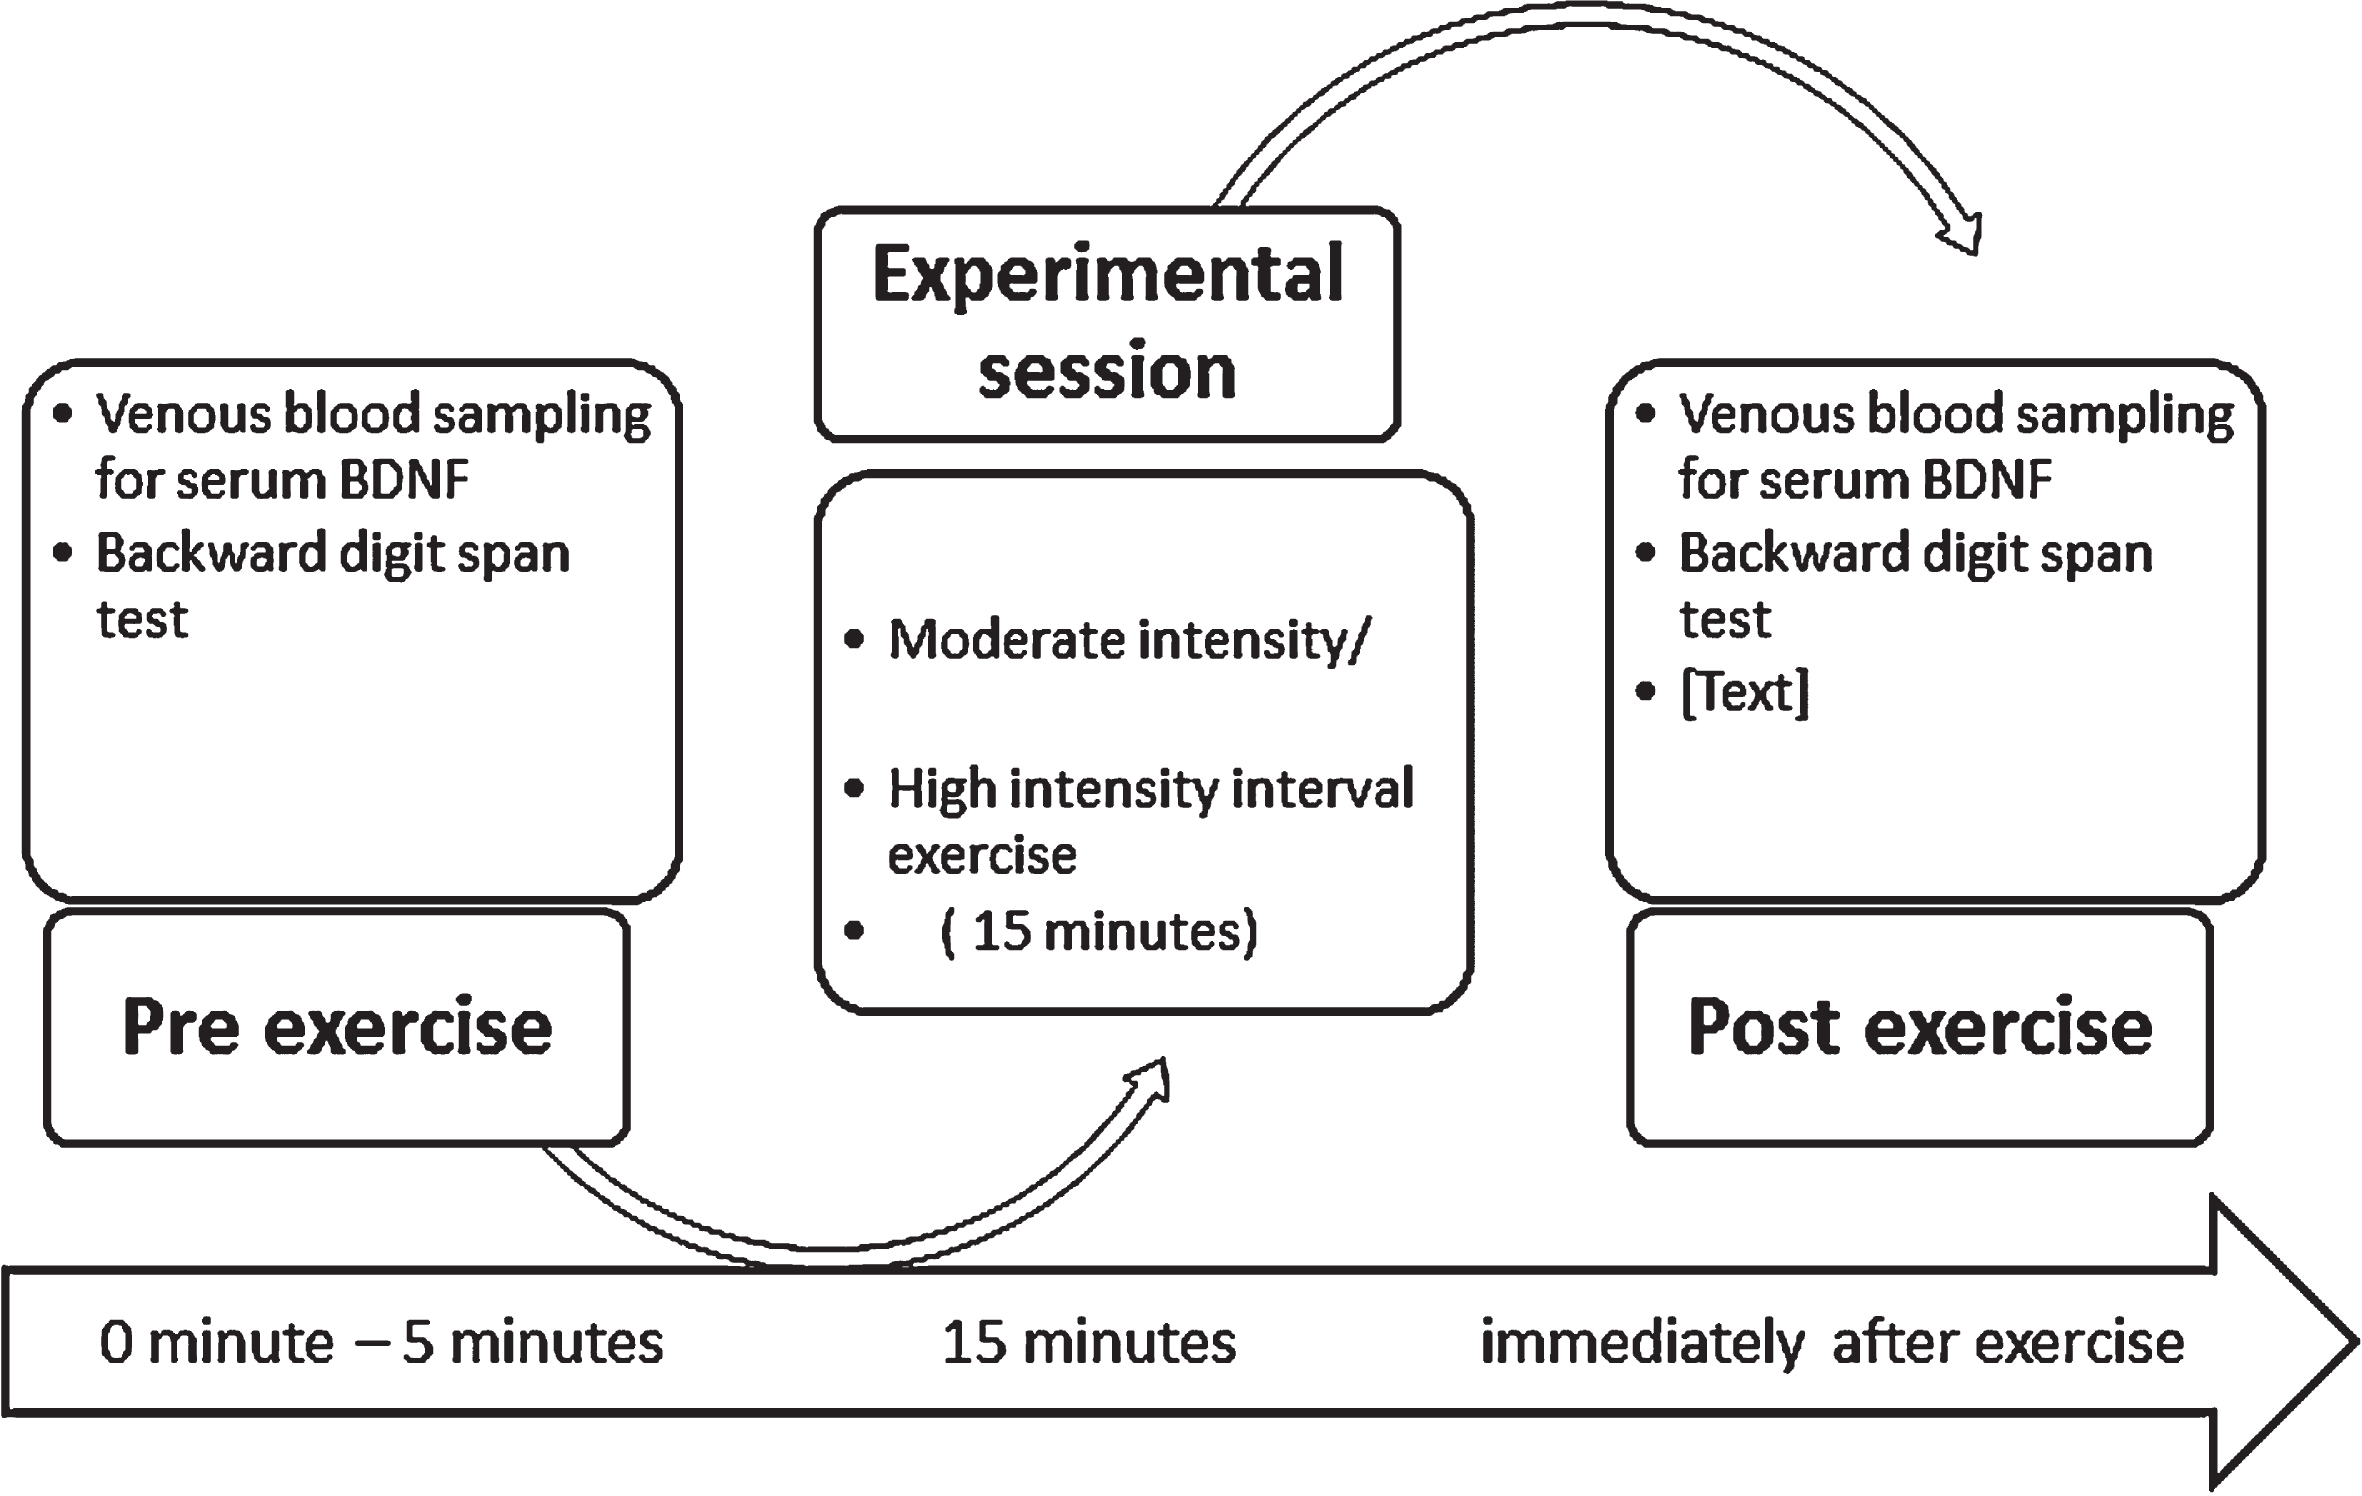 Overview of experimental sessions.